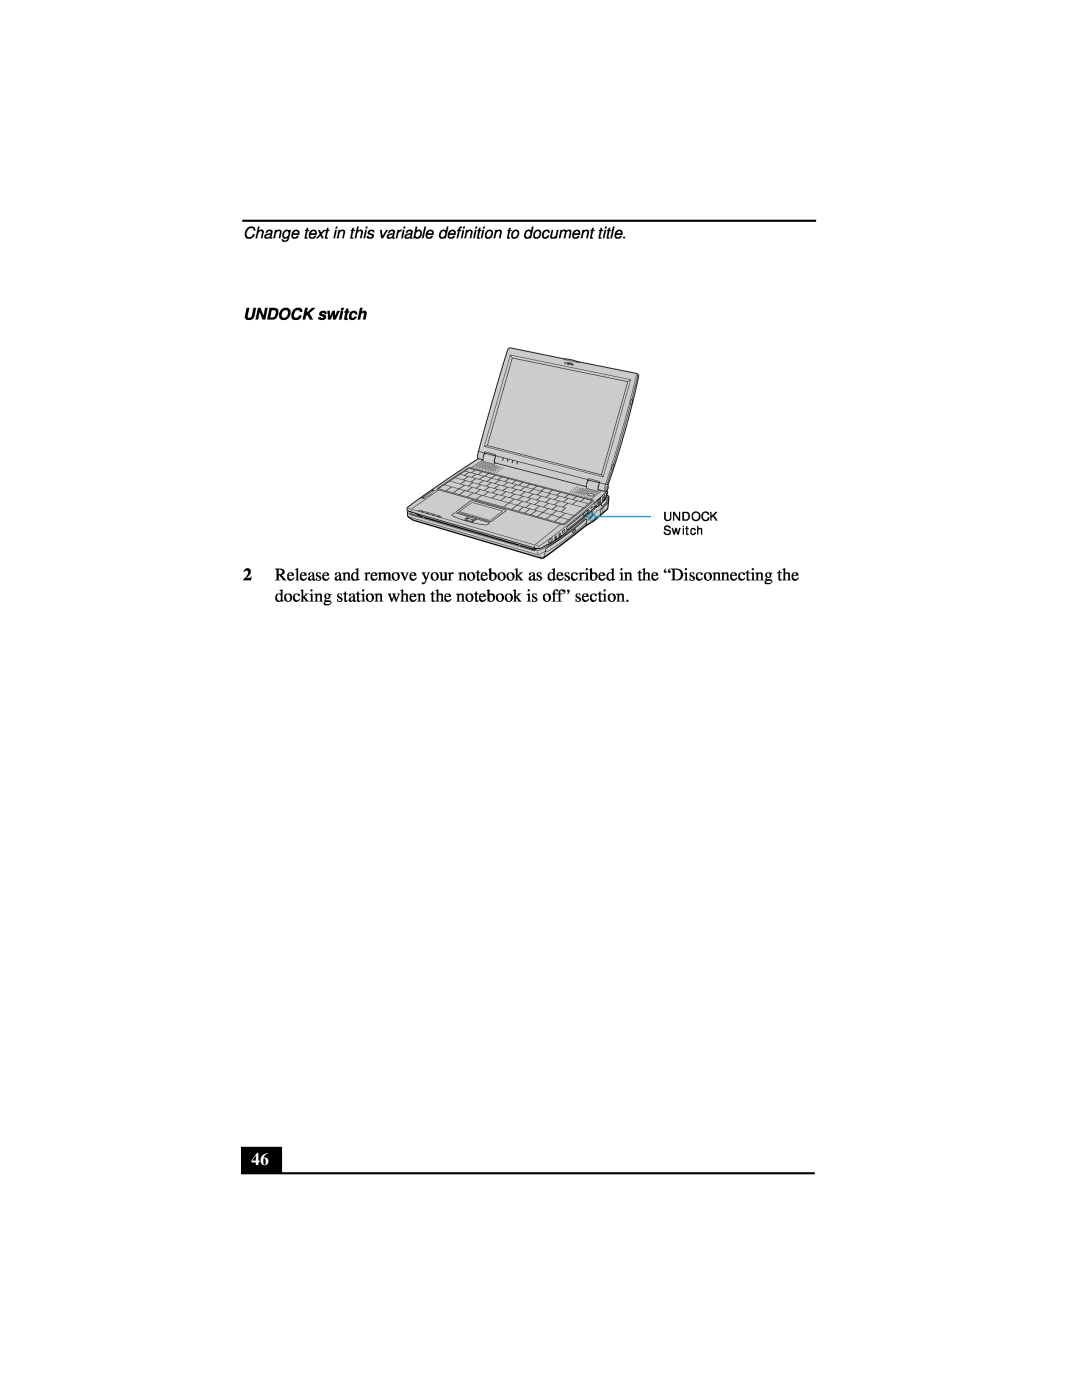 Sony Notebook Computer manual Change text in this variable definition to document title, UNDOCK switch, UNDOCK Switch 